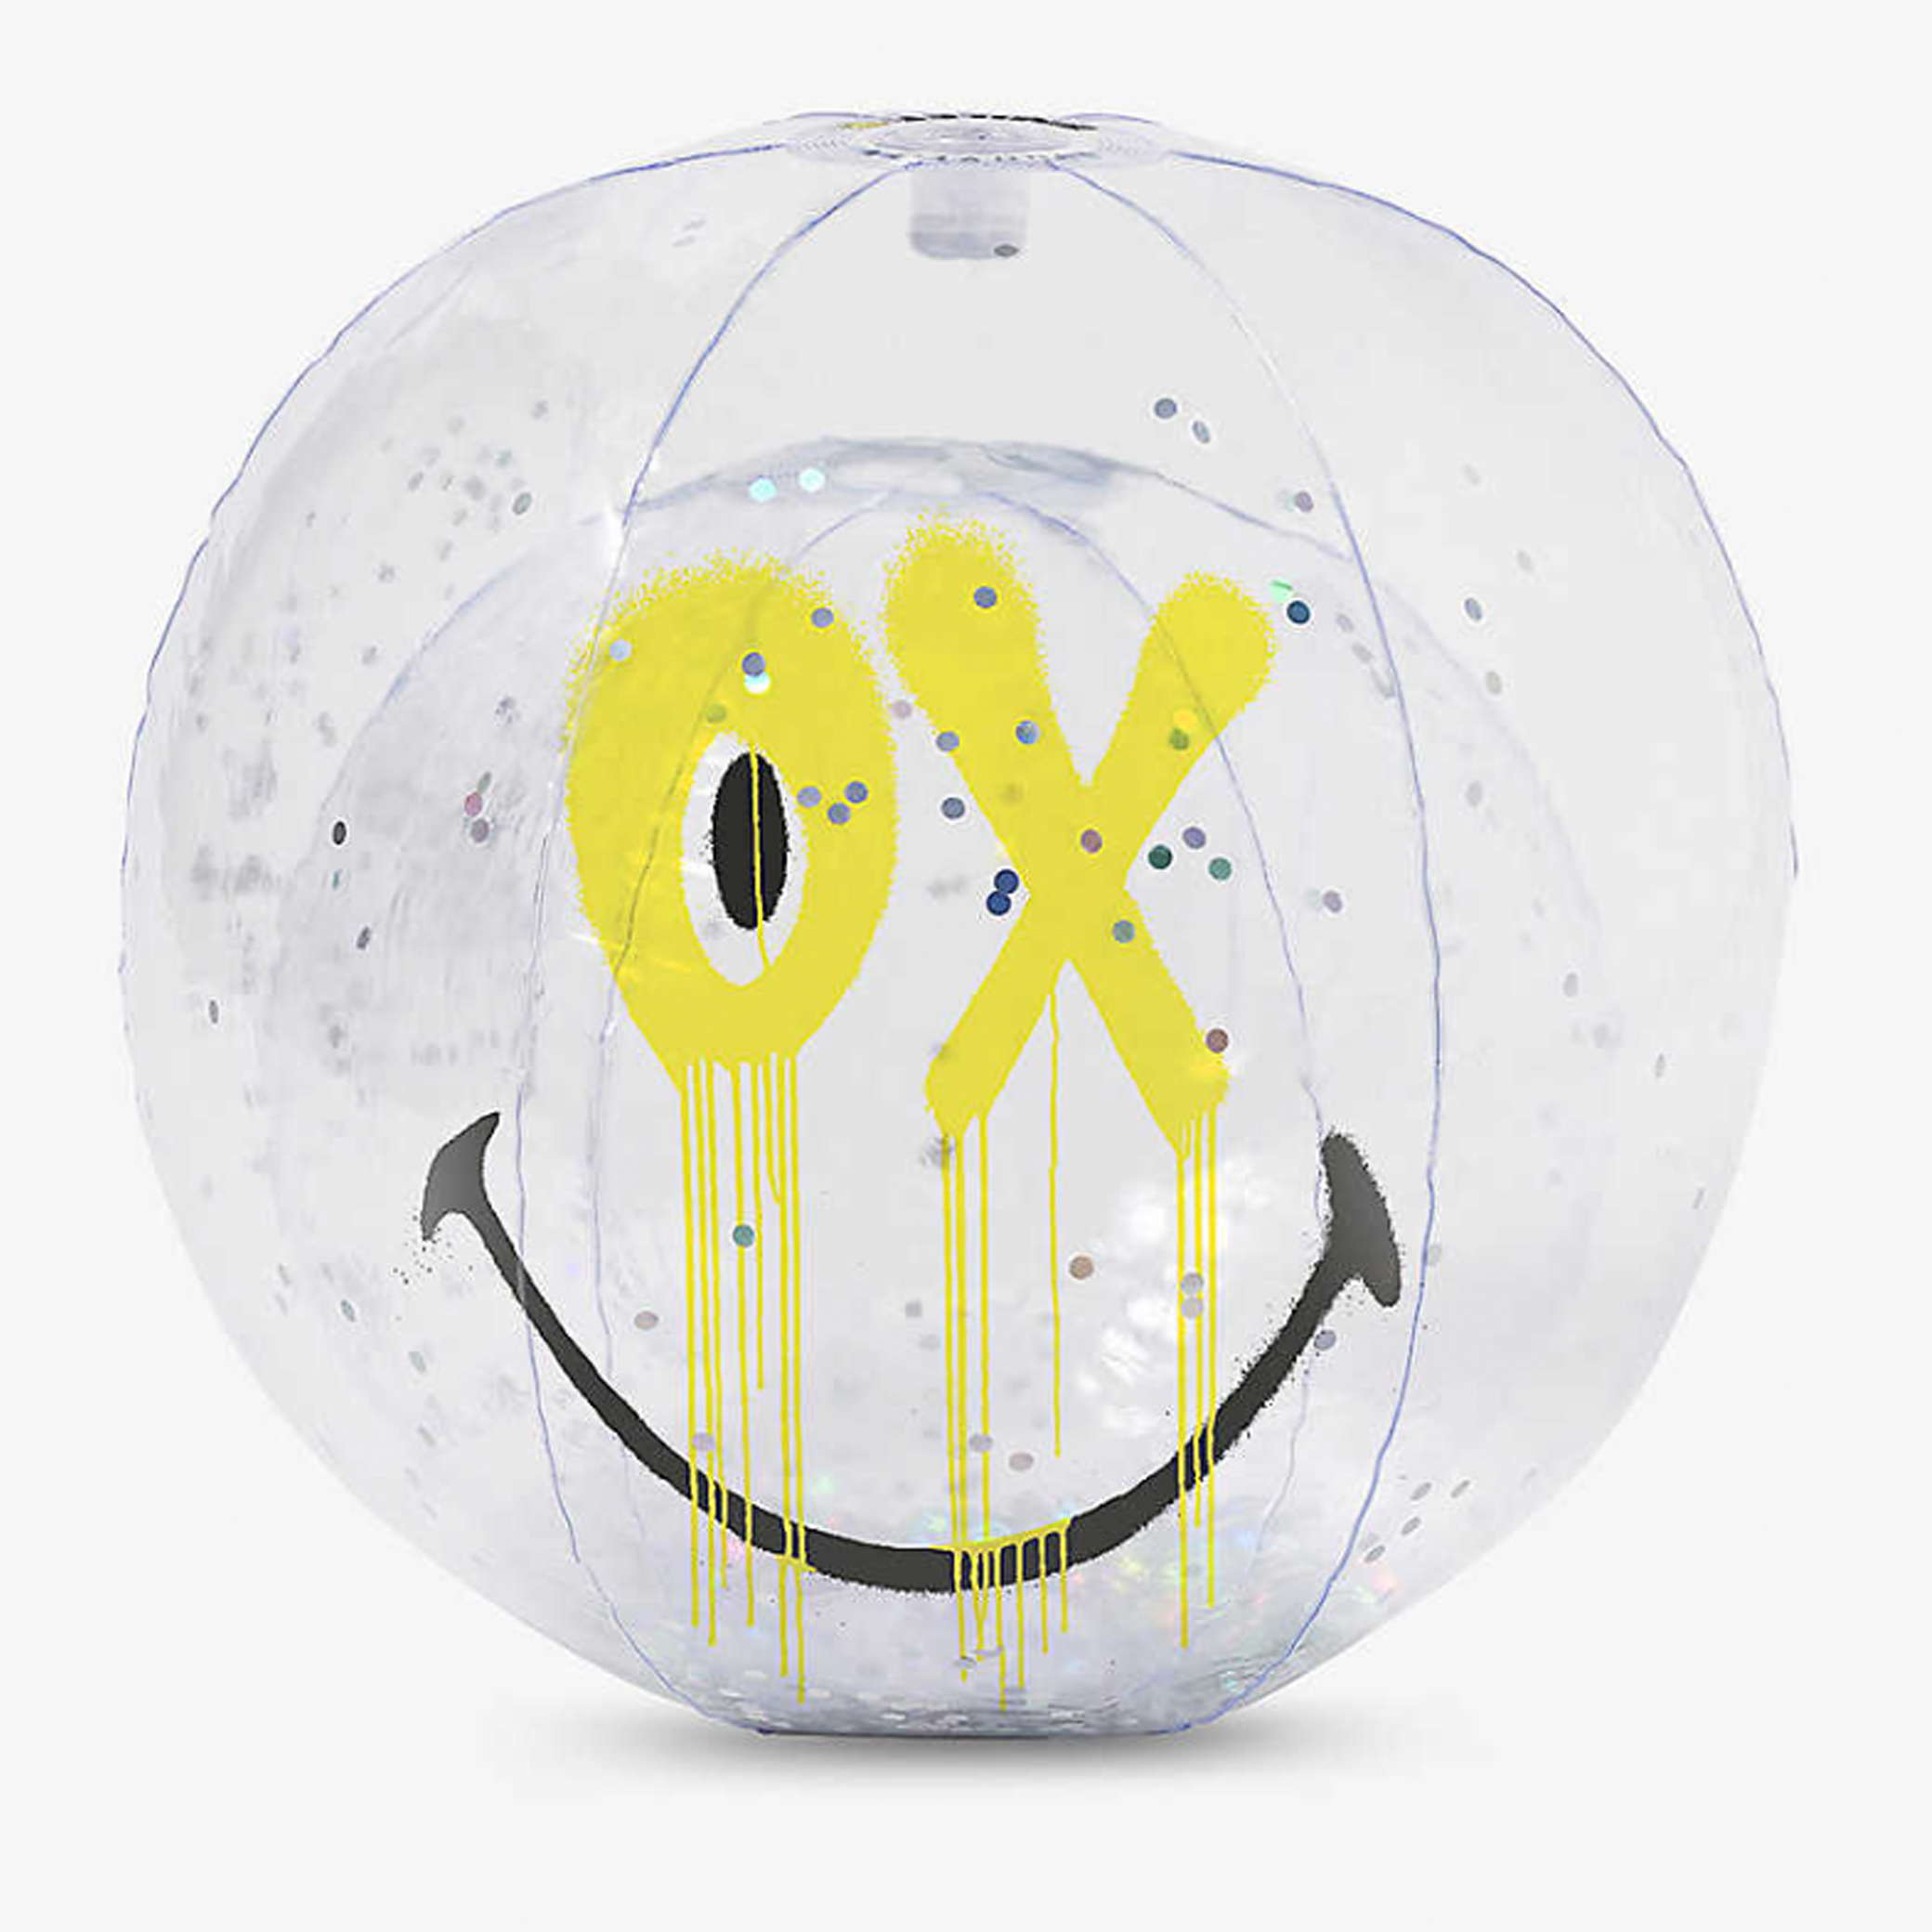 Sunnylife Limited Edition Smiley Graphic Print Beach Ball